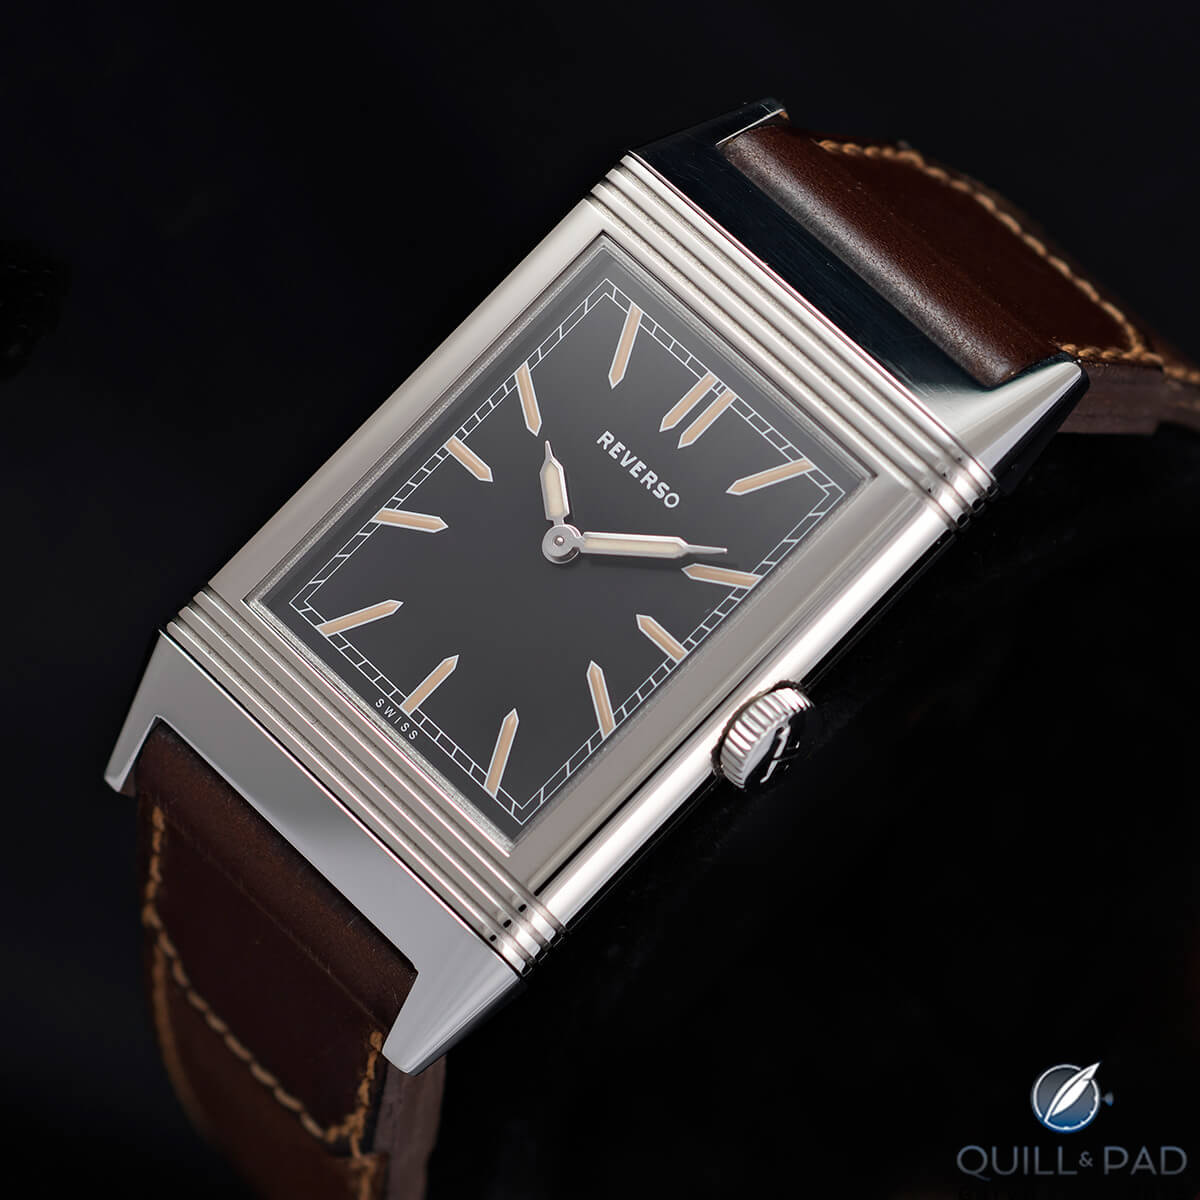 Contemporary times: tribute to the Jaeger-LeCoultre Reverso 1931 U.S. limited production